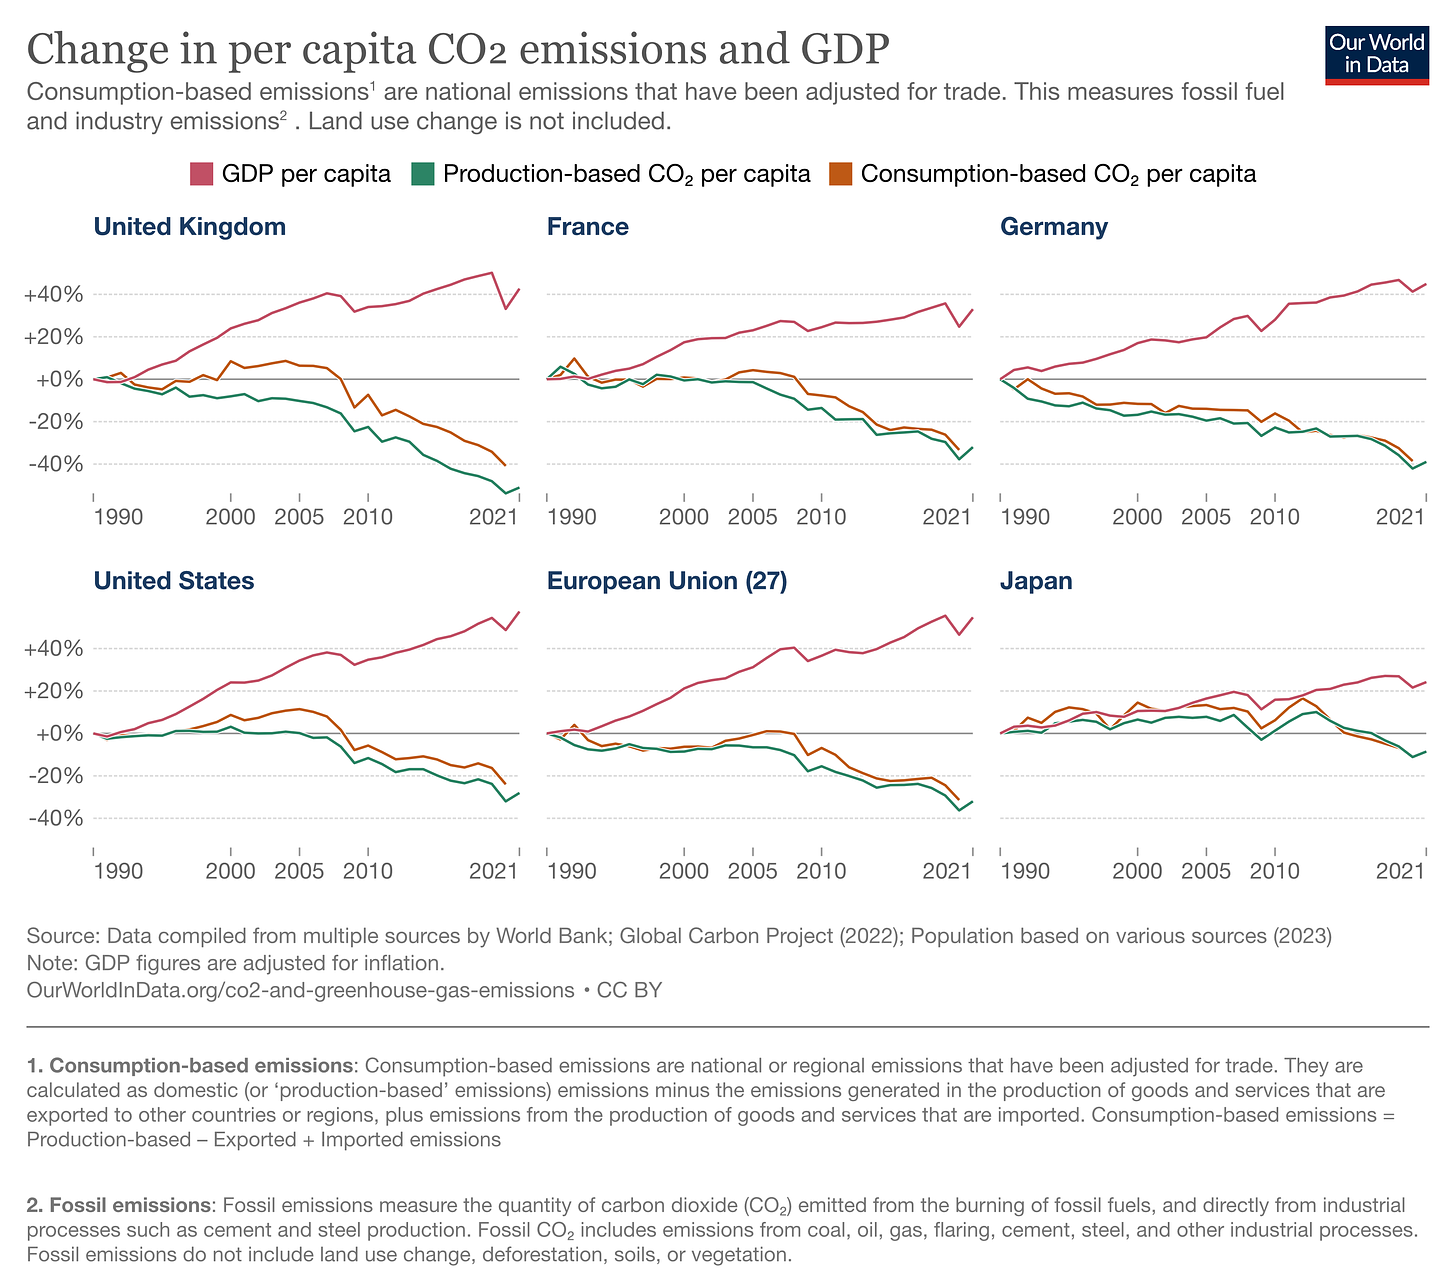 co2-emissions-and-gdp-per-capita-2.png